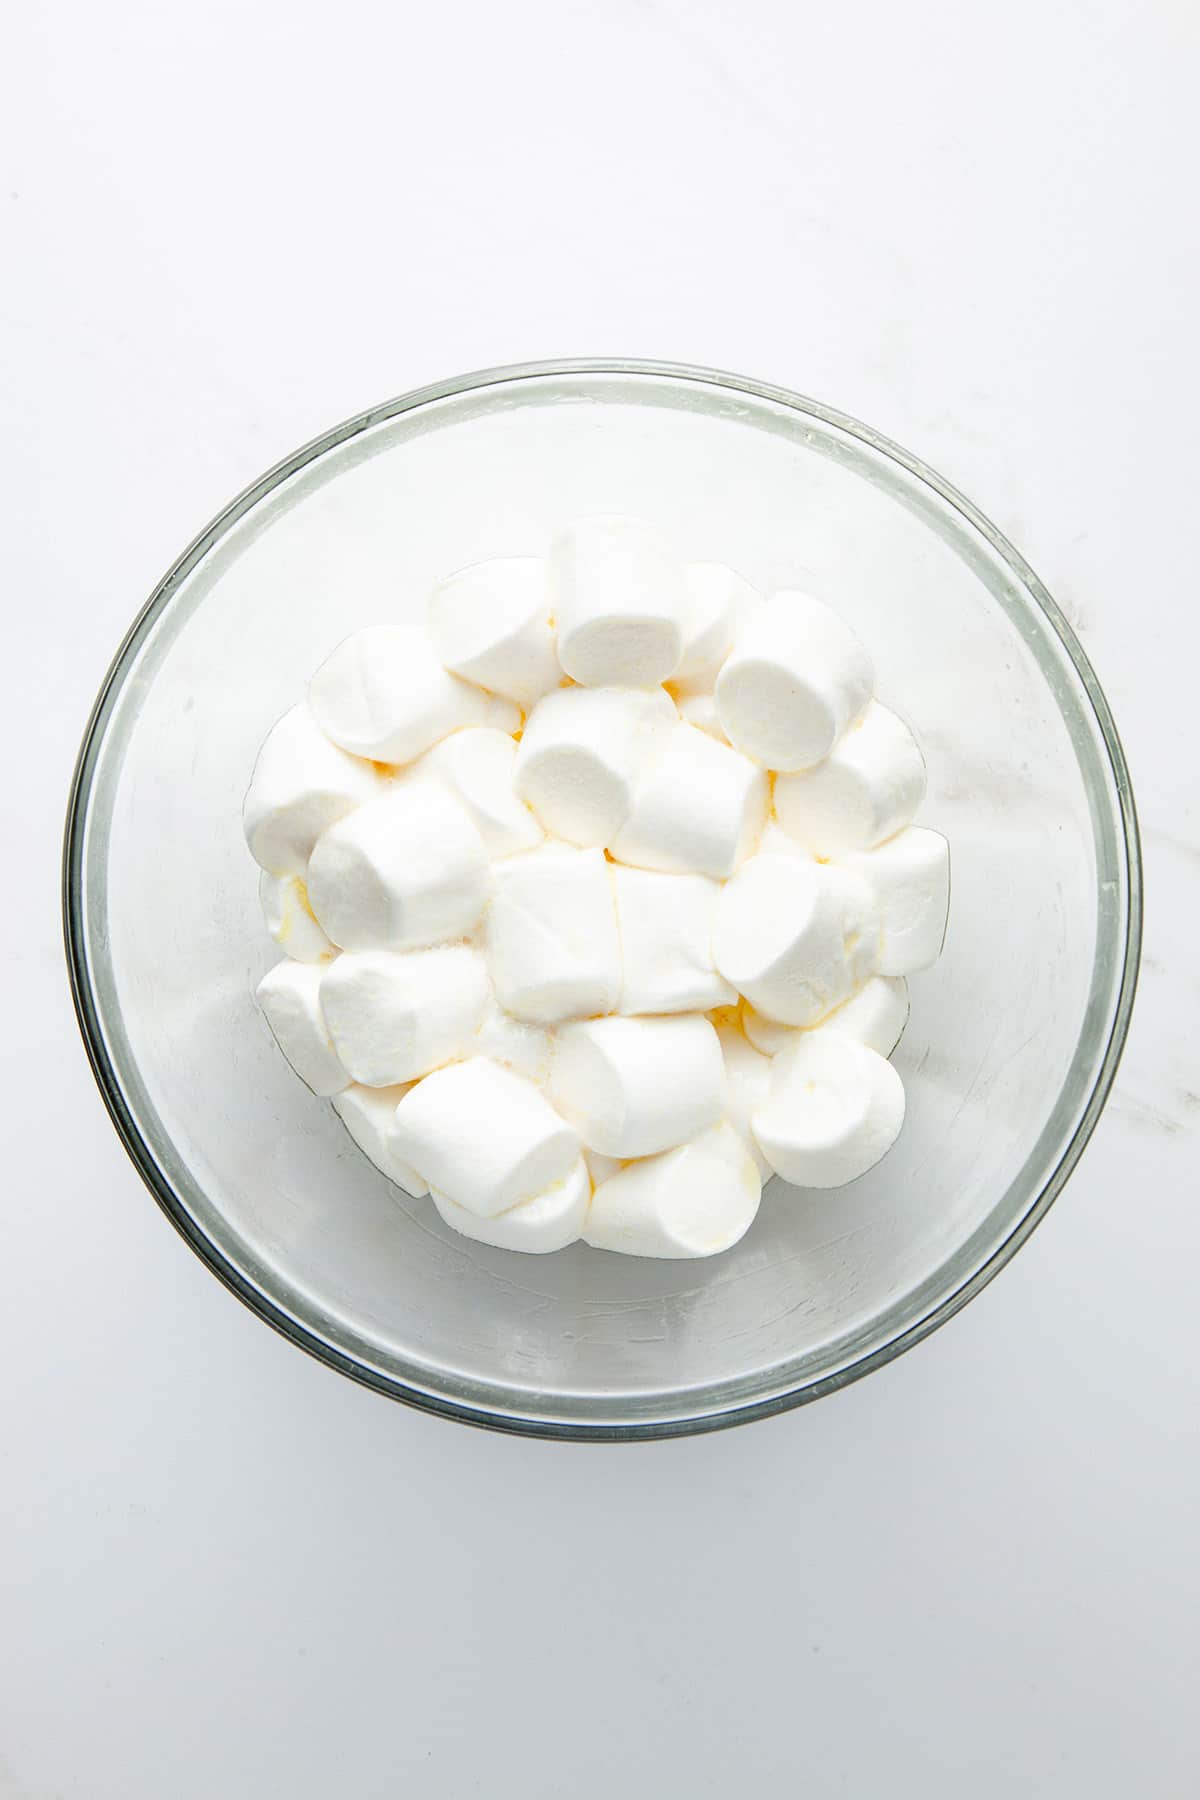 A glass bowl of half melted marshmallows.